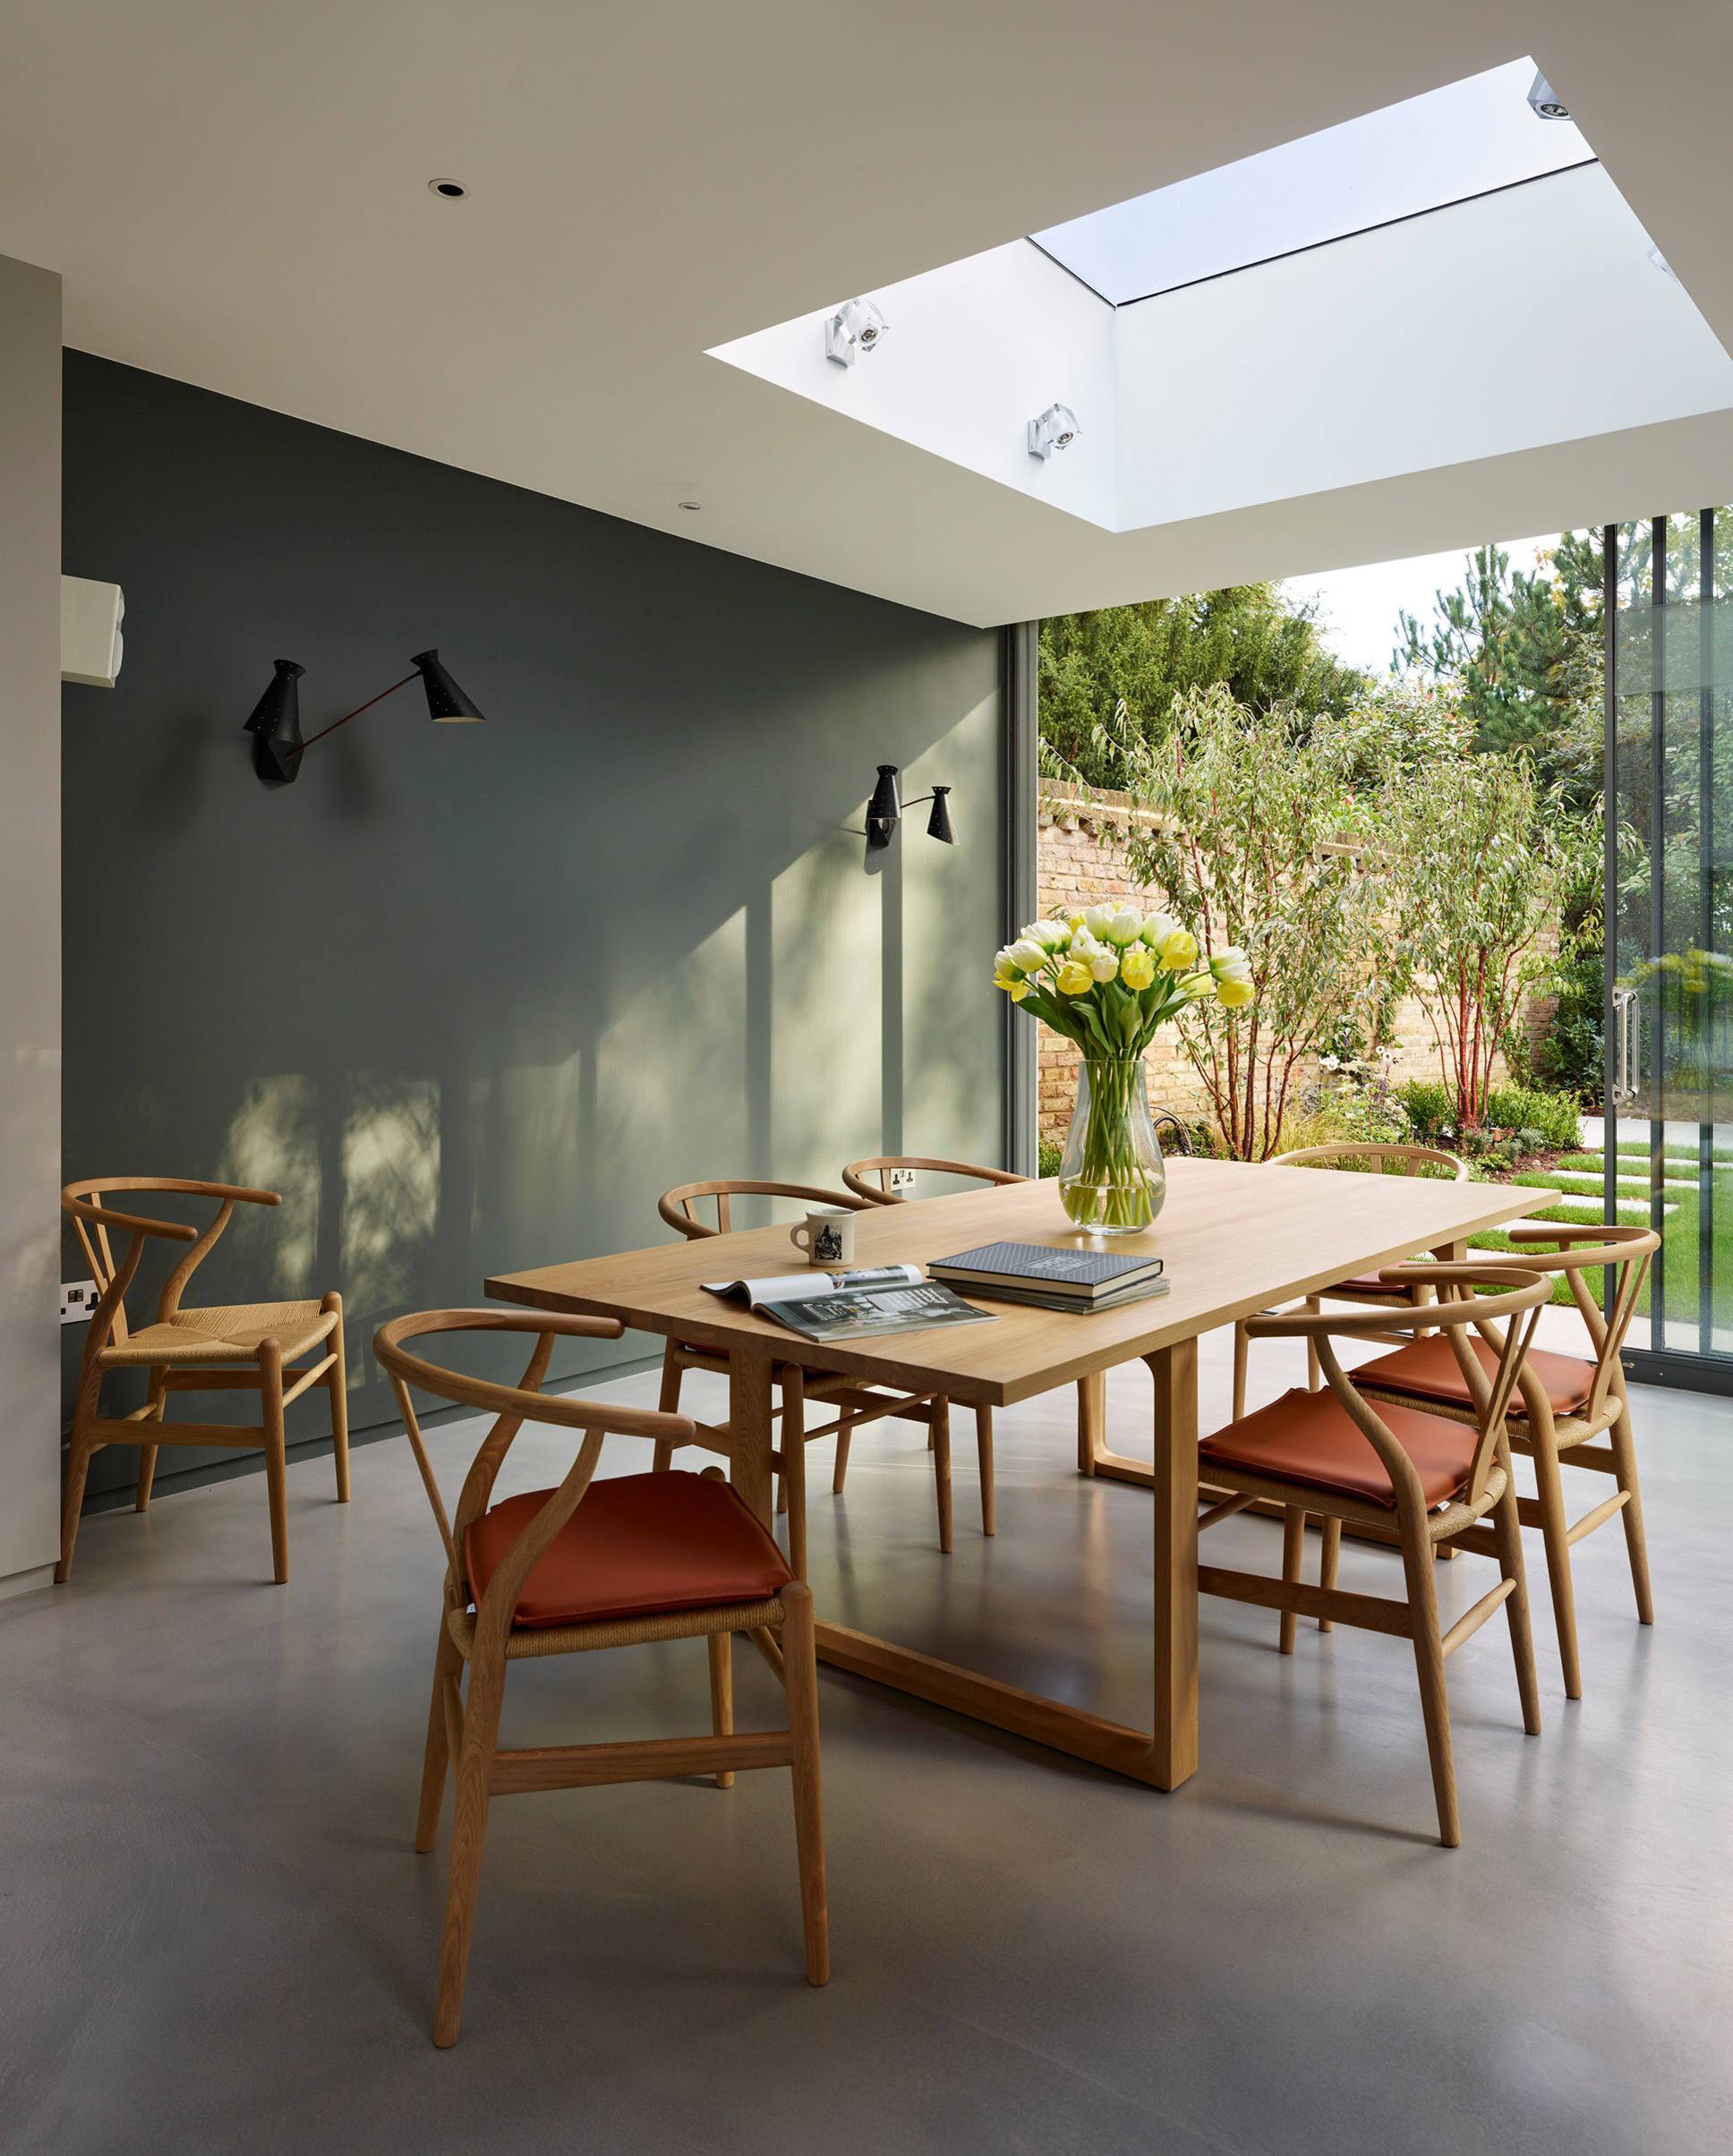 Japandi is a fusion of Scandinavian and Japanese design (from Houzz)